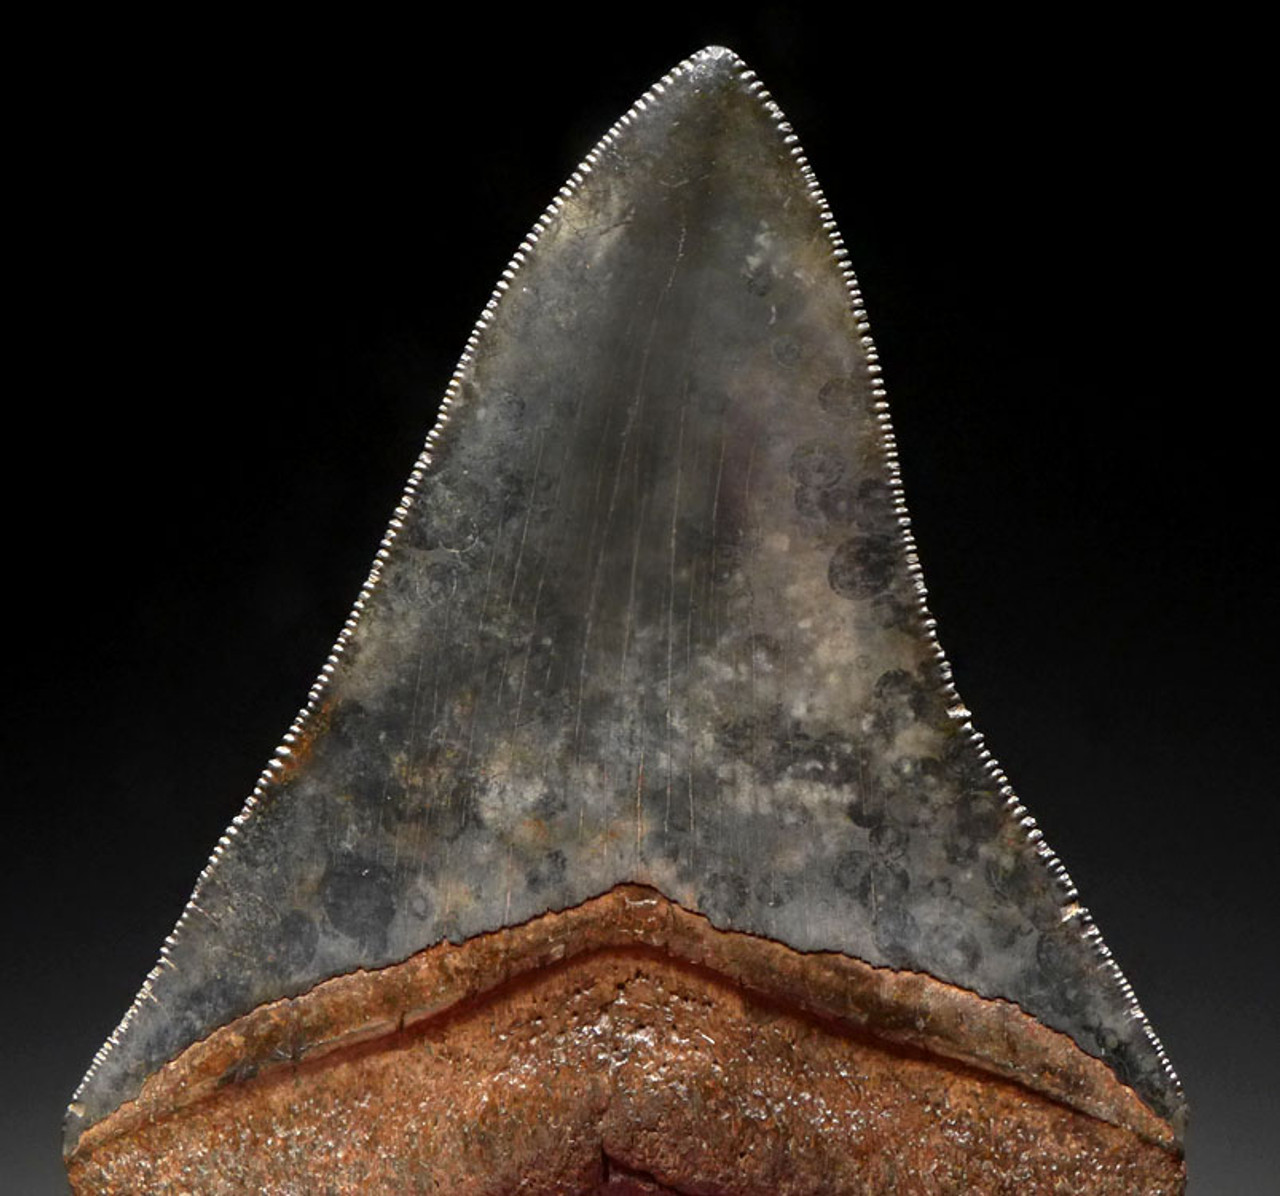 SH6-386 - COLLECTOR GRADE 4 INCH MEGALODON SHARK TOOTH WITH RARE SPOTTED AND MARBLED BLUE GRAY ENAMEL